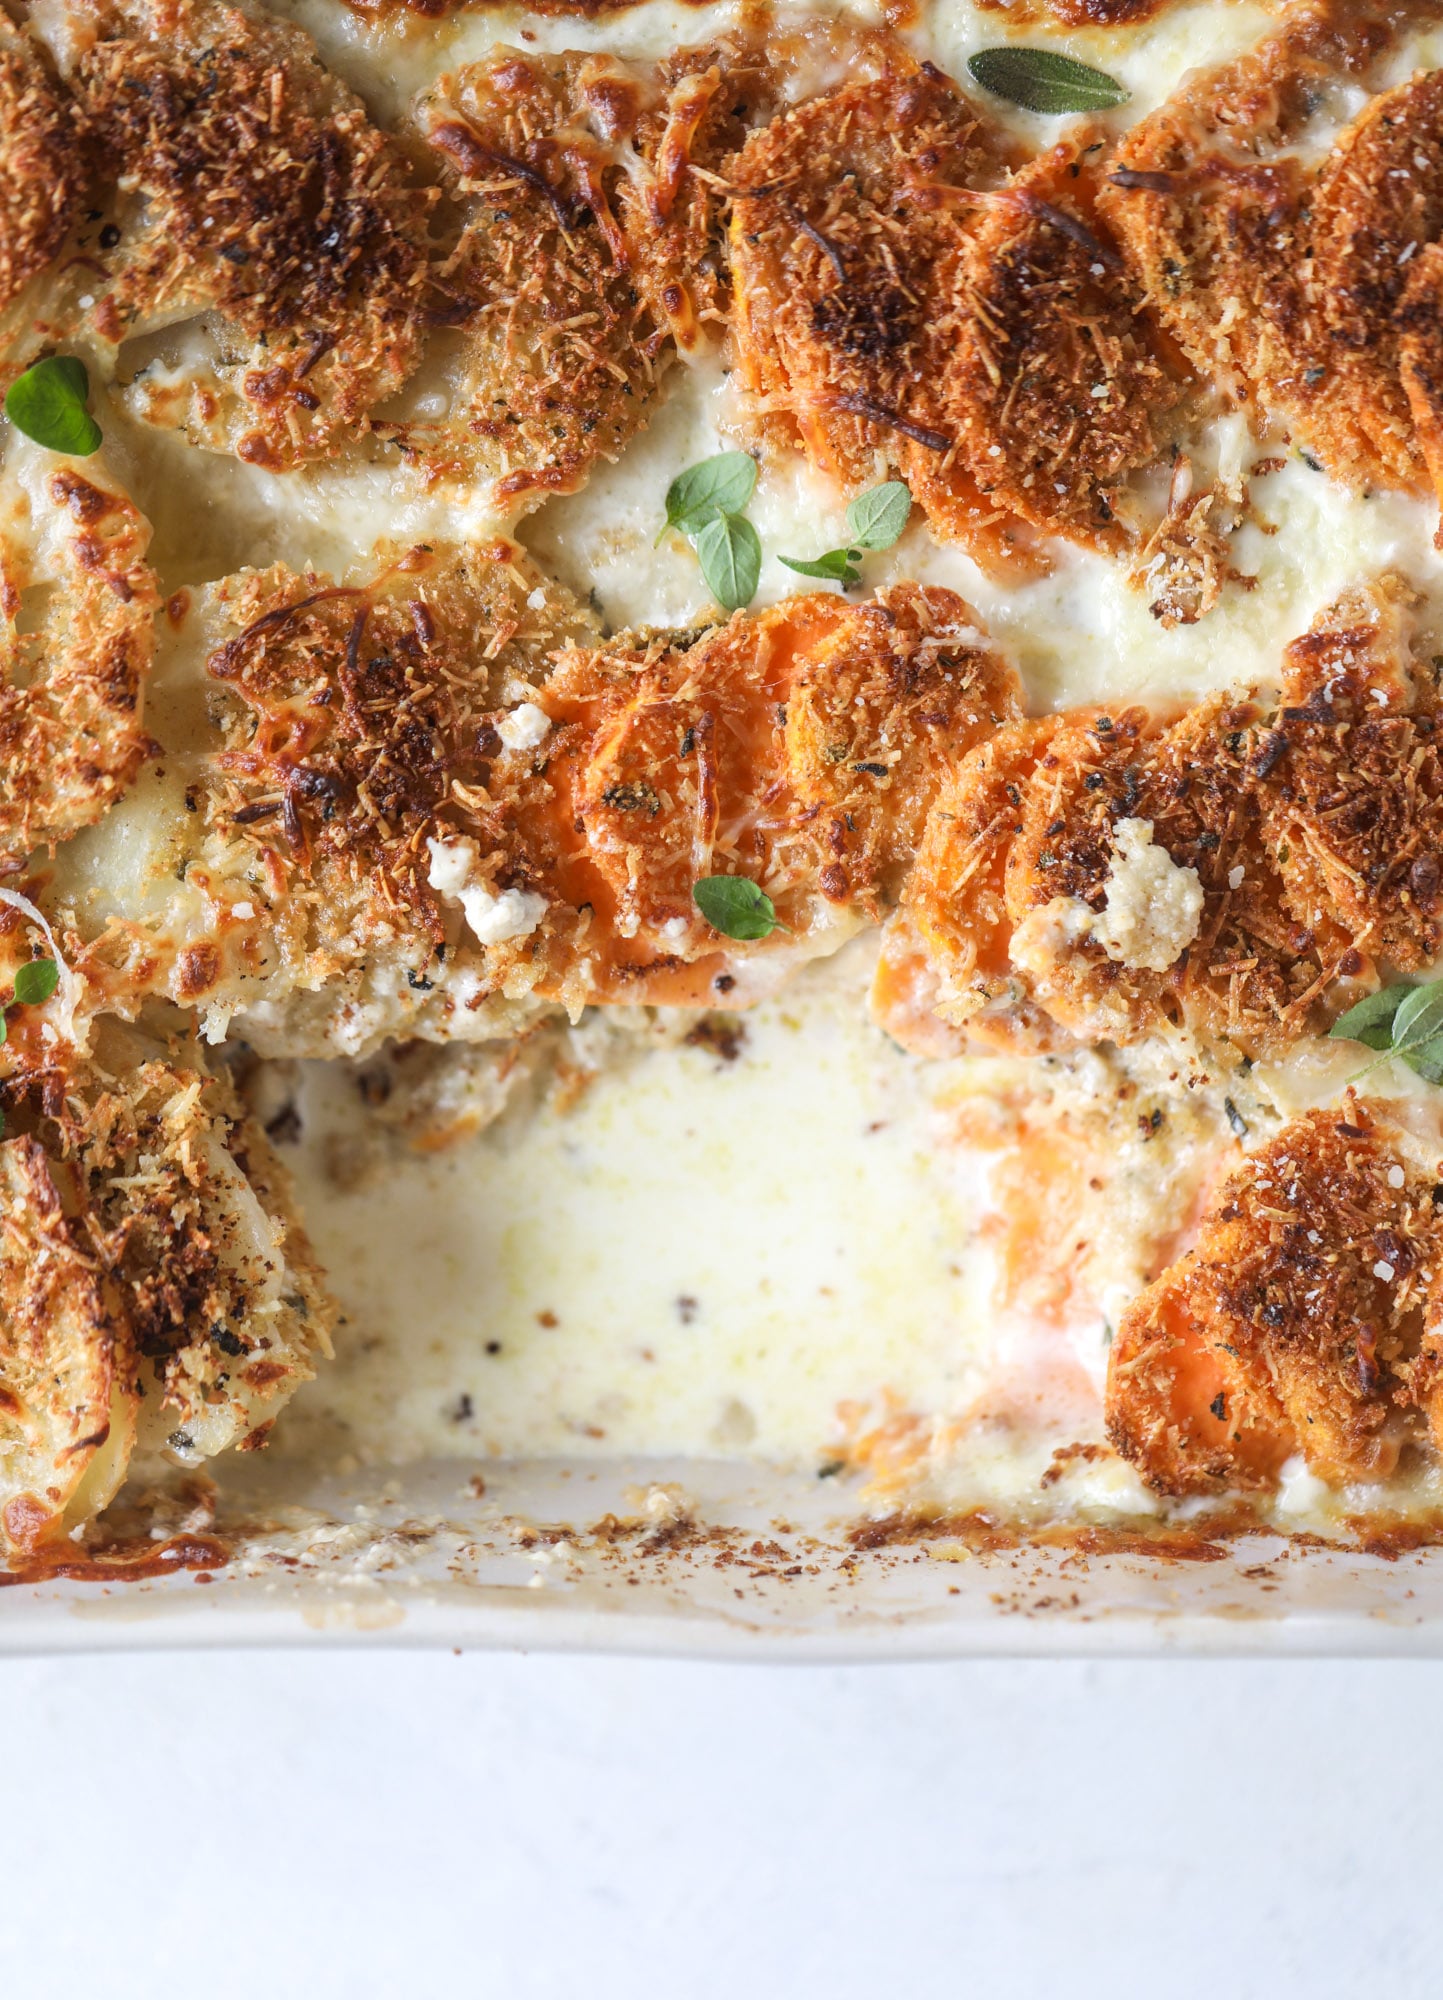 These scalloped potatoes are a cheese lover's dream. Sharp asiago and cream envelops idaho and sweet potatoes in these scalloped potatoes to please everyone! The crunchy asiago topping is irresistible. I howsweeteats.com #scalloped #potatoes